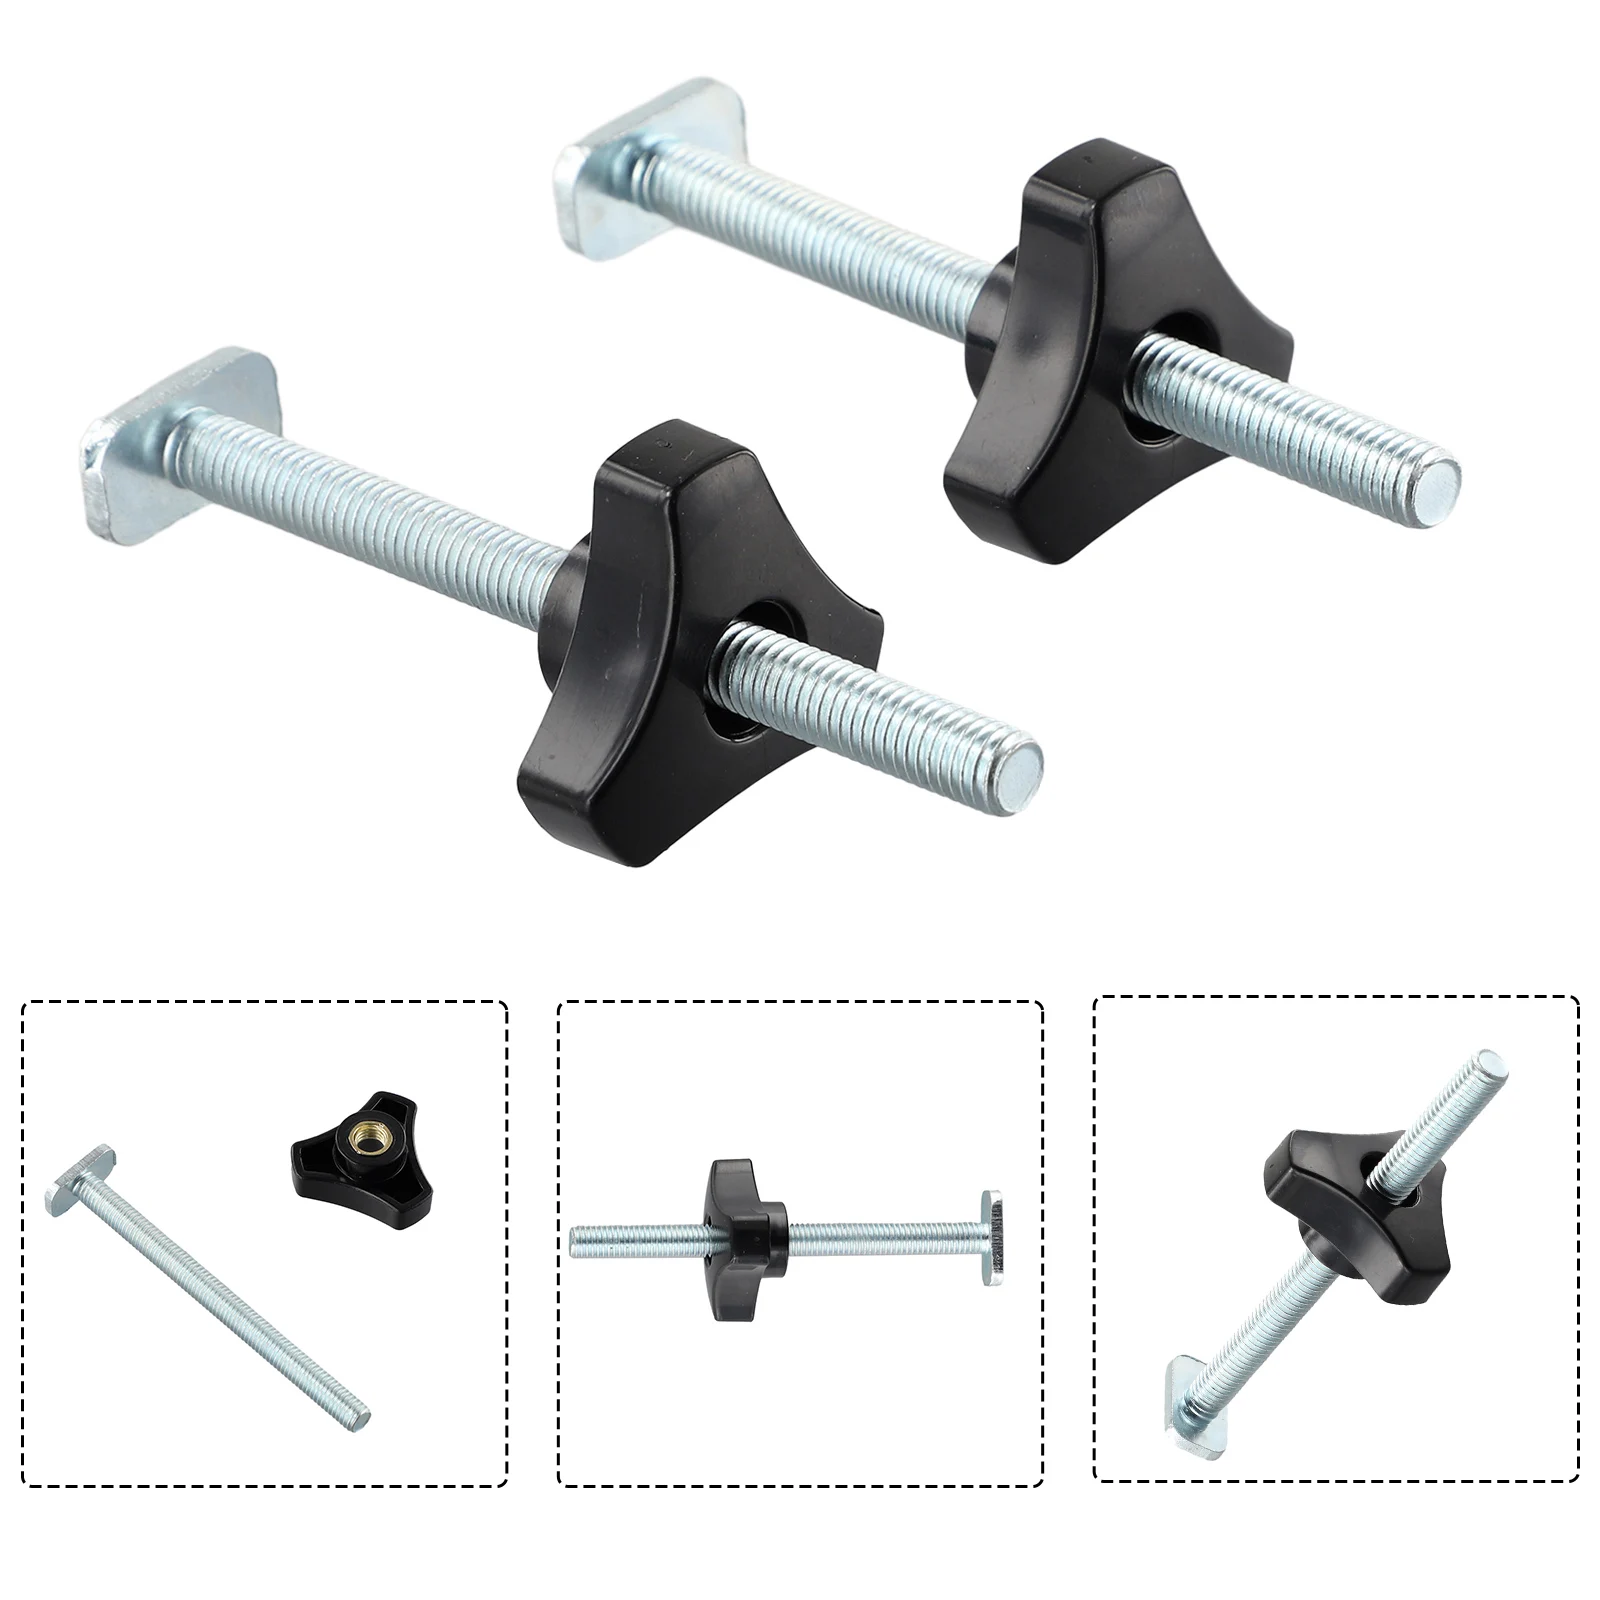 

2/5 Pcs T Bolt Nut Set M8 M6 Woodworking Tool Jigs Screw Slot Fastener Through Hole Nut Miter Track Bolts Jig Retaining Clamps